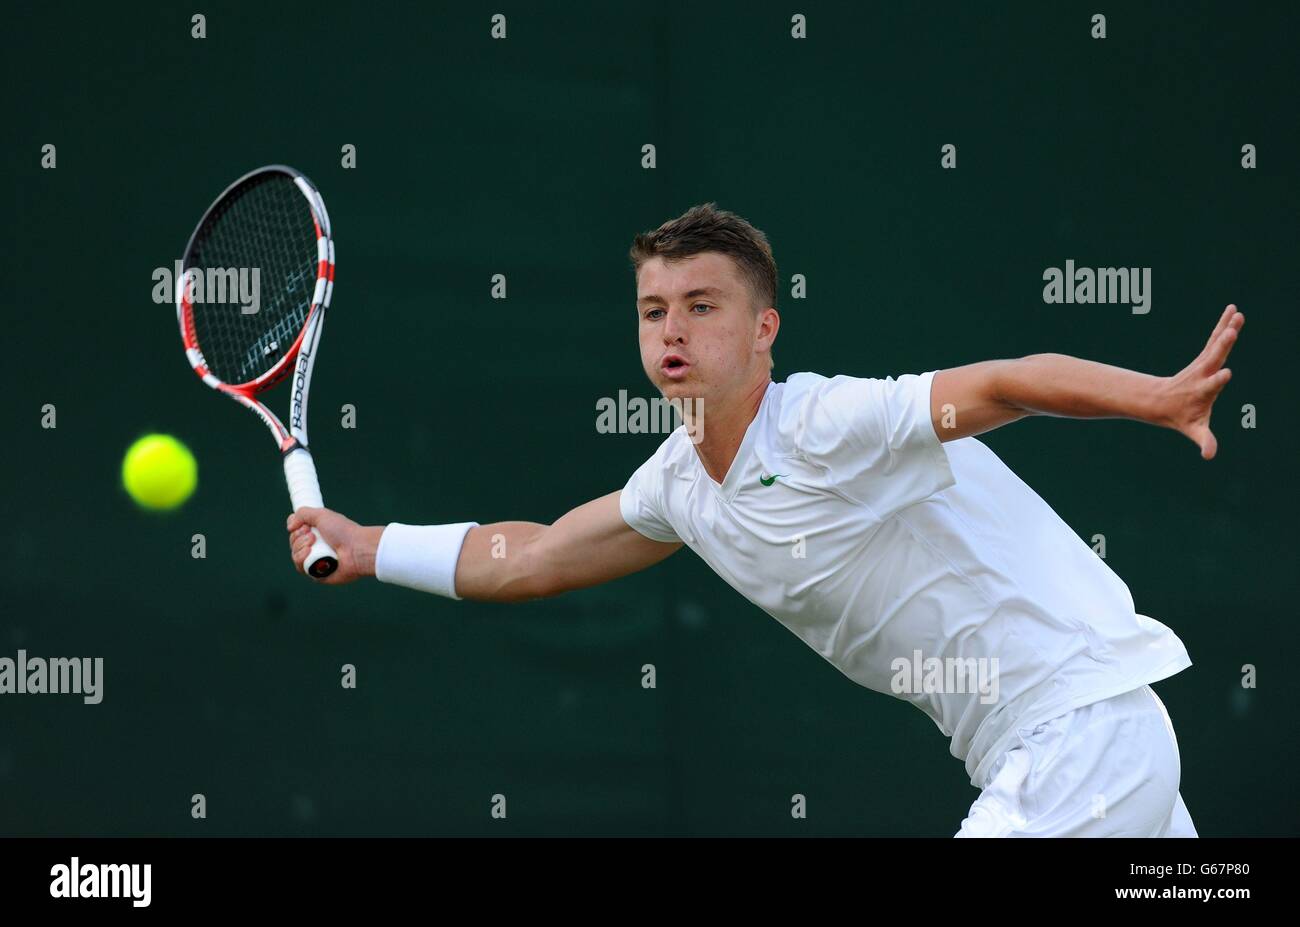 Great Britain's Jonny O'Mara in action against France's Maxime Janvier in his Boy's Singles match during day seven of the Wimbledon Championships at The All England Lawn Tennis and Croquet Club, Wimbledon. Stock Photo